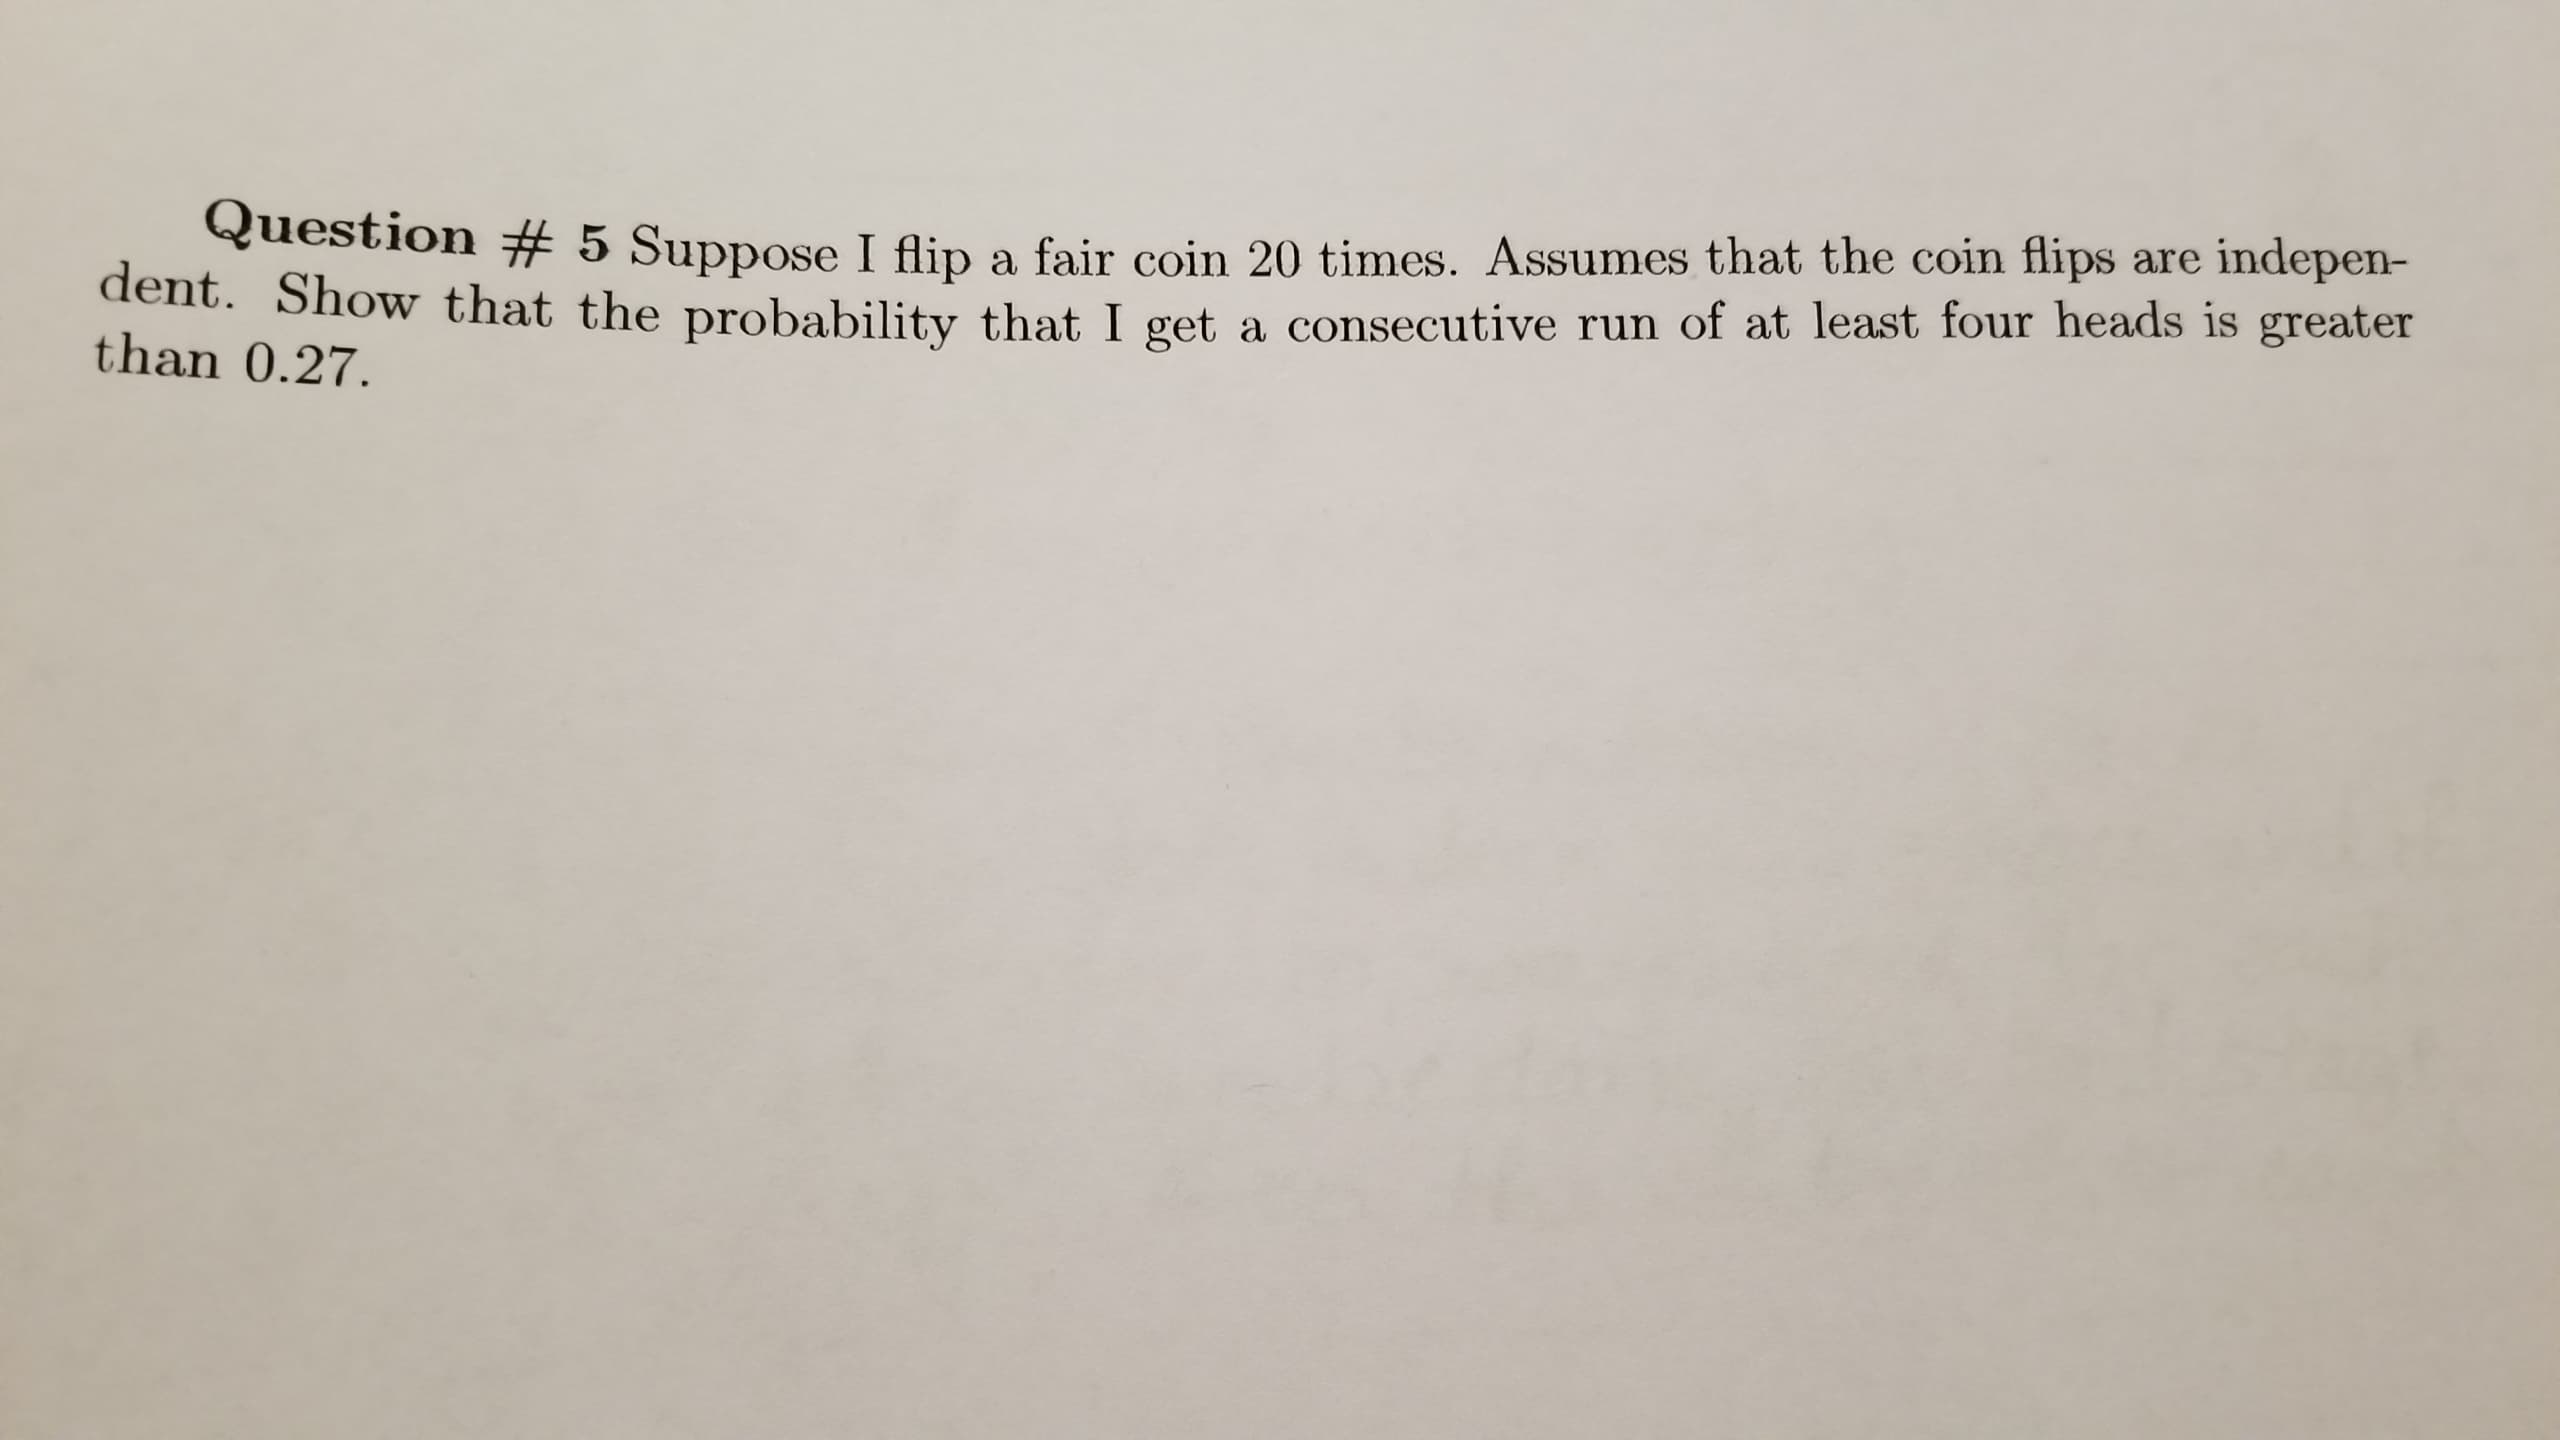 Question # 5 Suppose I flip a fair coin 20 times. Assumes that the coin flips are indepen-
he probability that I get a consecutive run of at least four heads is greater
dent. Show that t
than 0.27.
